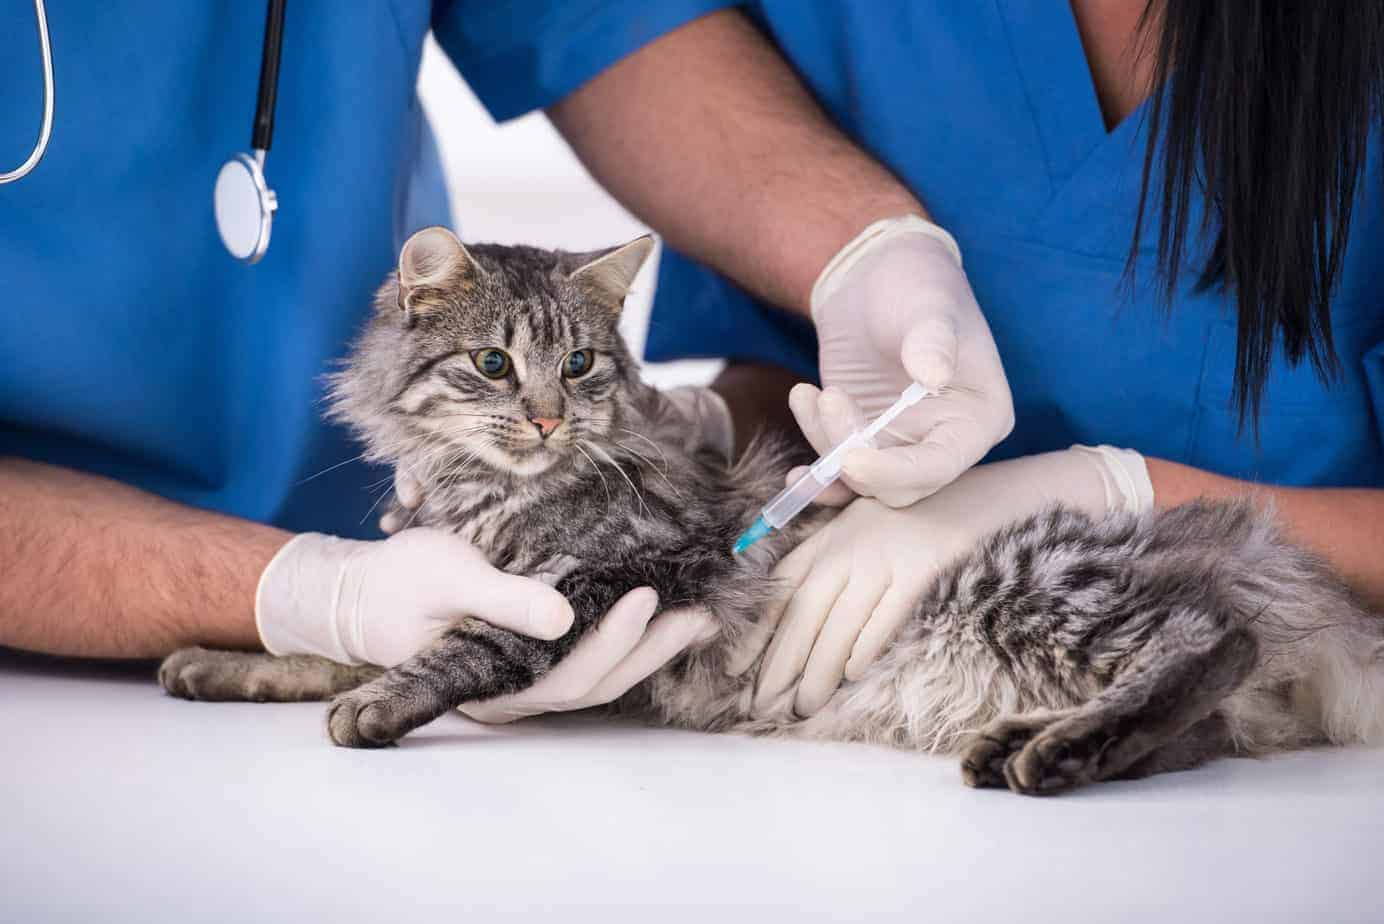 What vaccinations do I use to protect my cat's health? 1